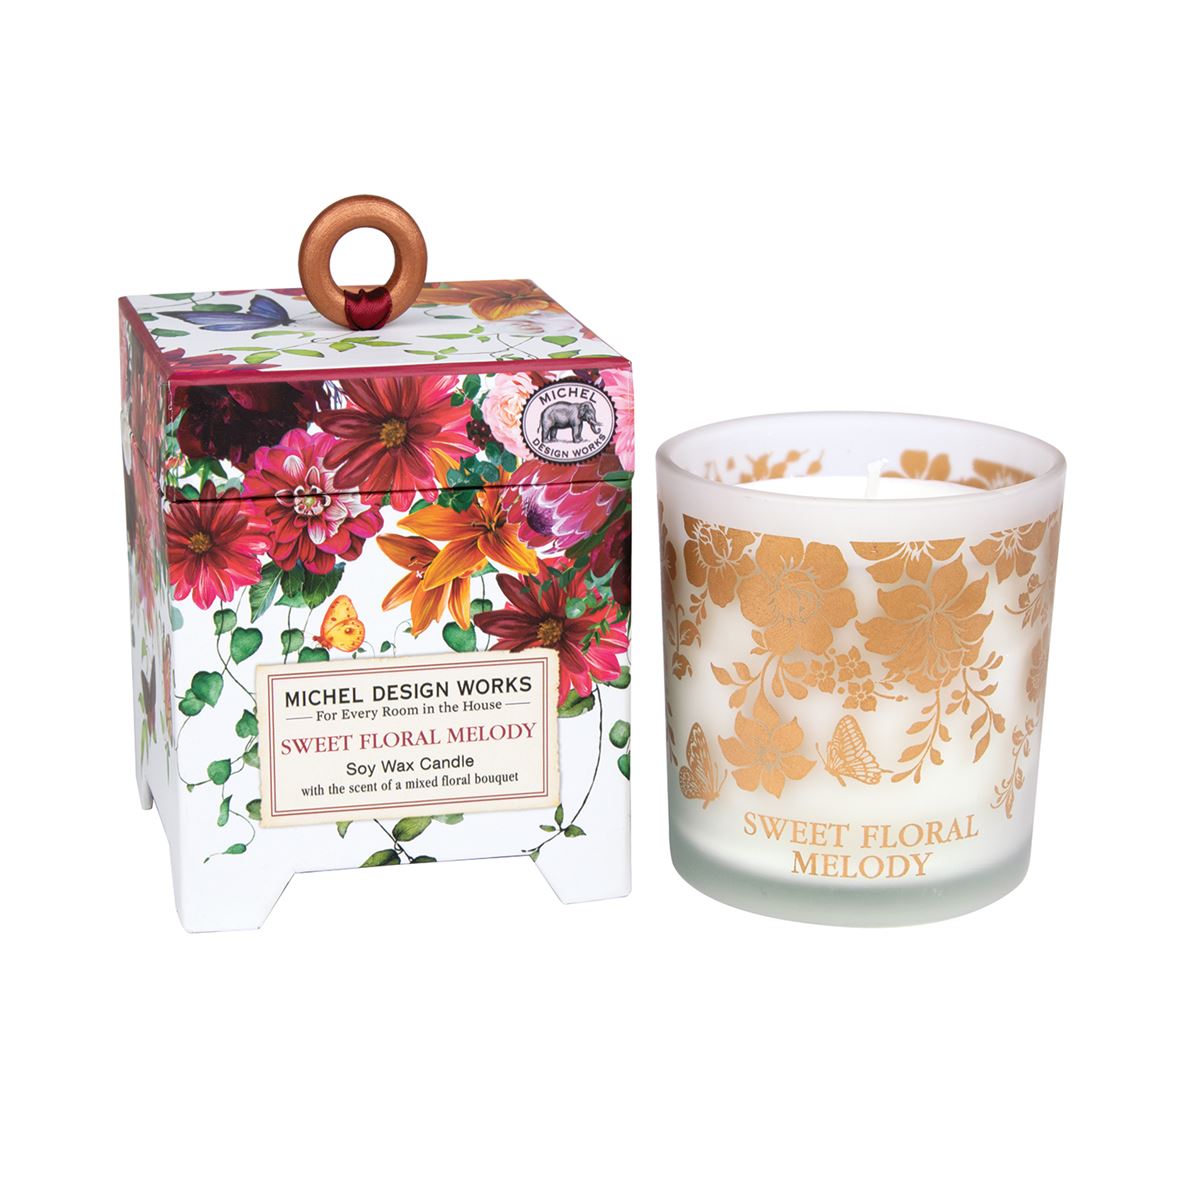 Michel Design Works Soy Wax Candle - 6.5 oz. - Sweet Floral Melody